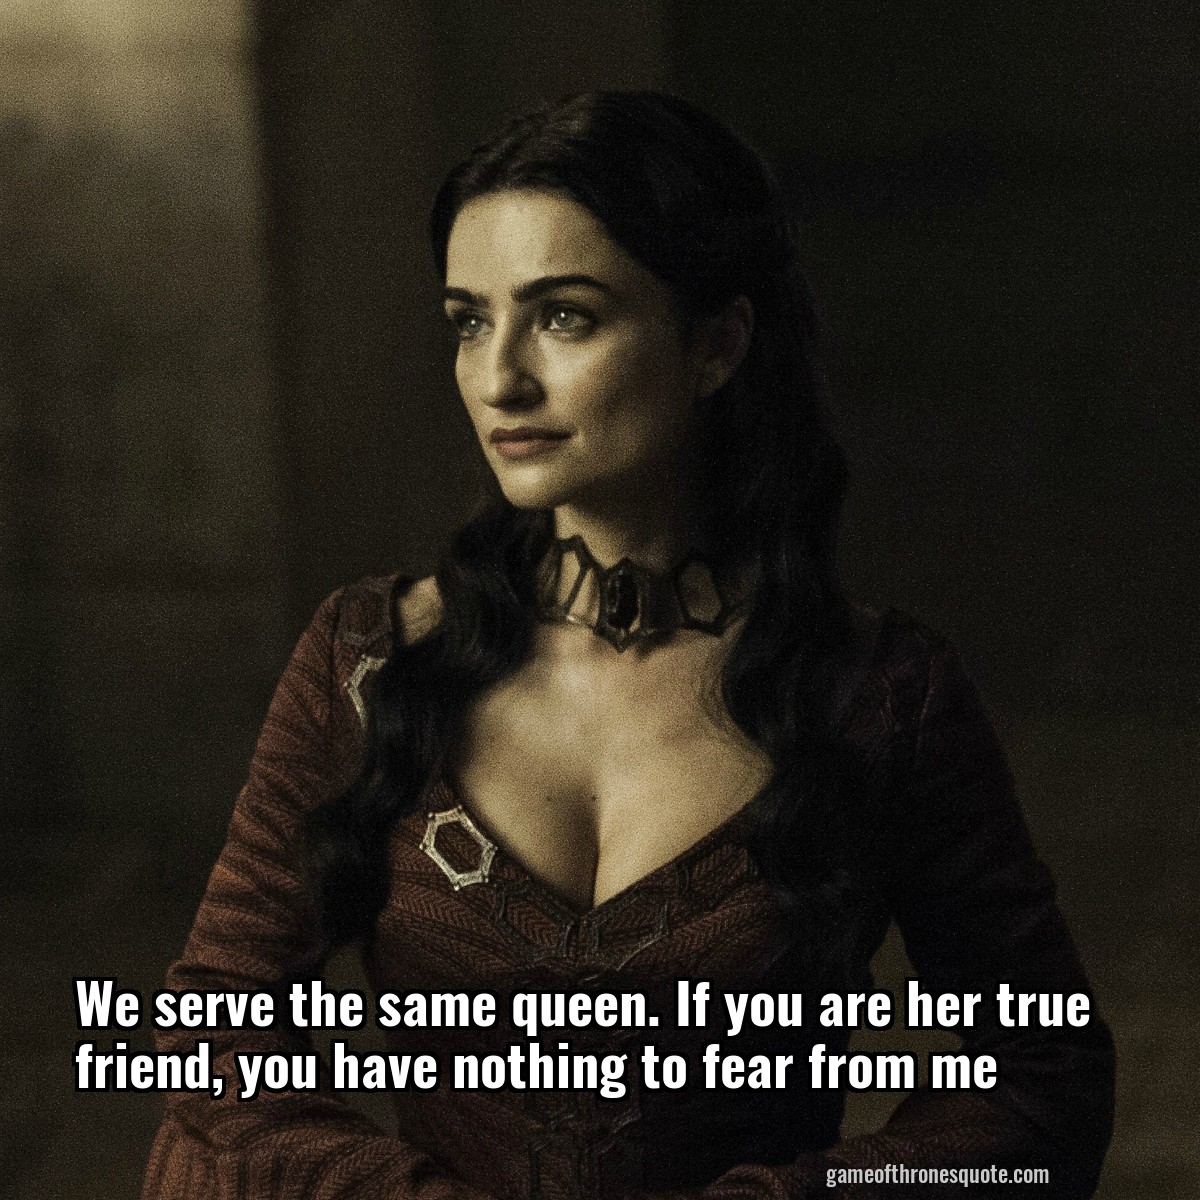 We serve the same queen. If you are her true friend, you have nothing to fear from me